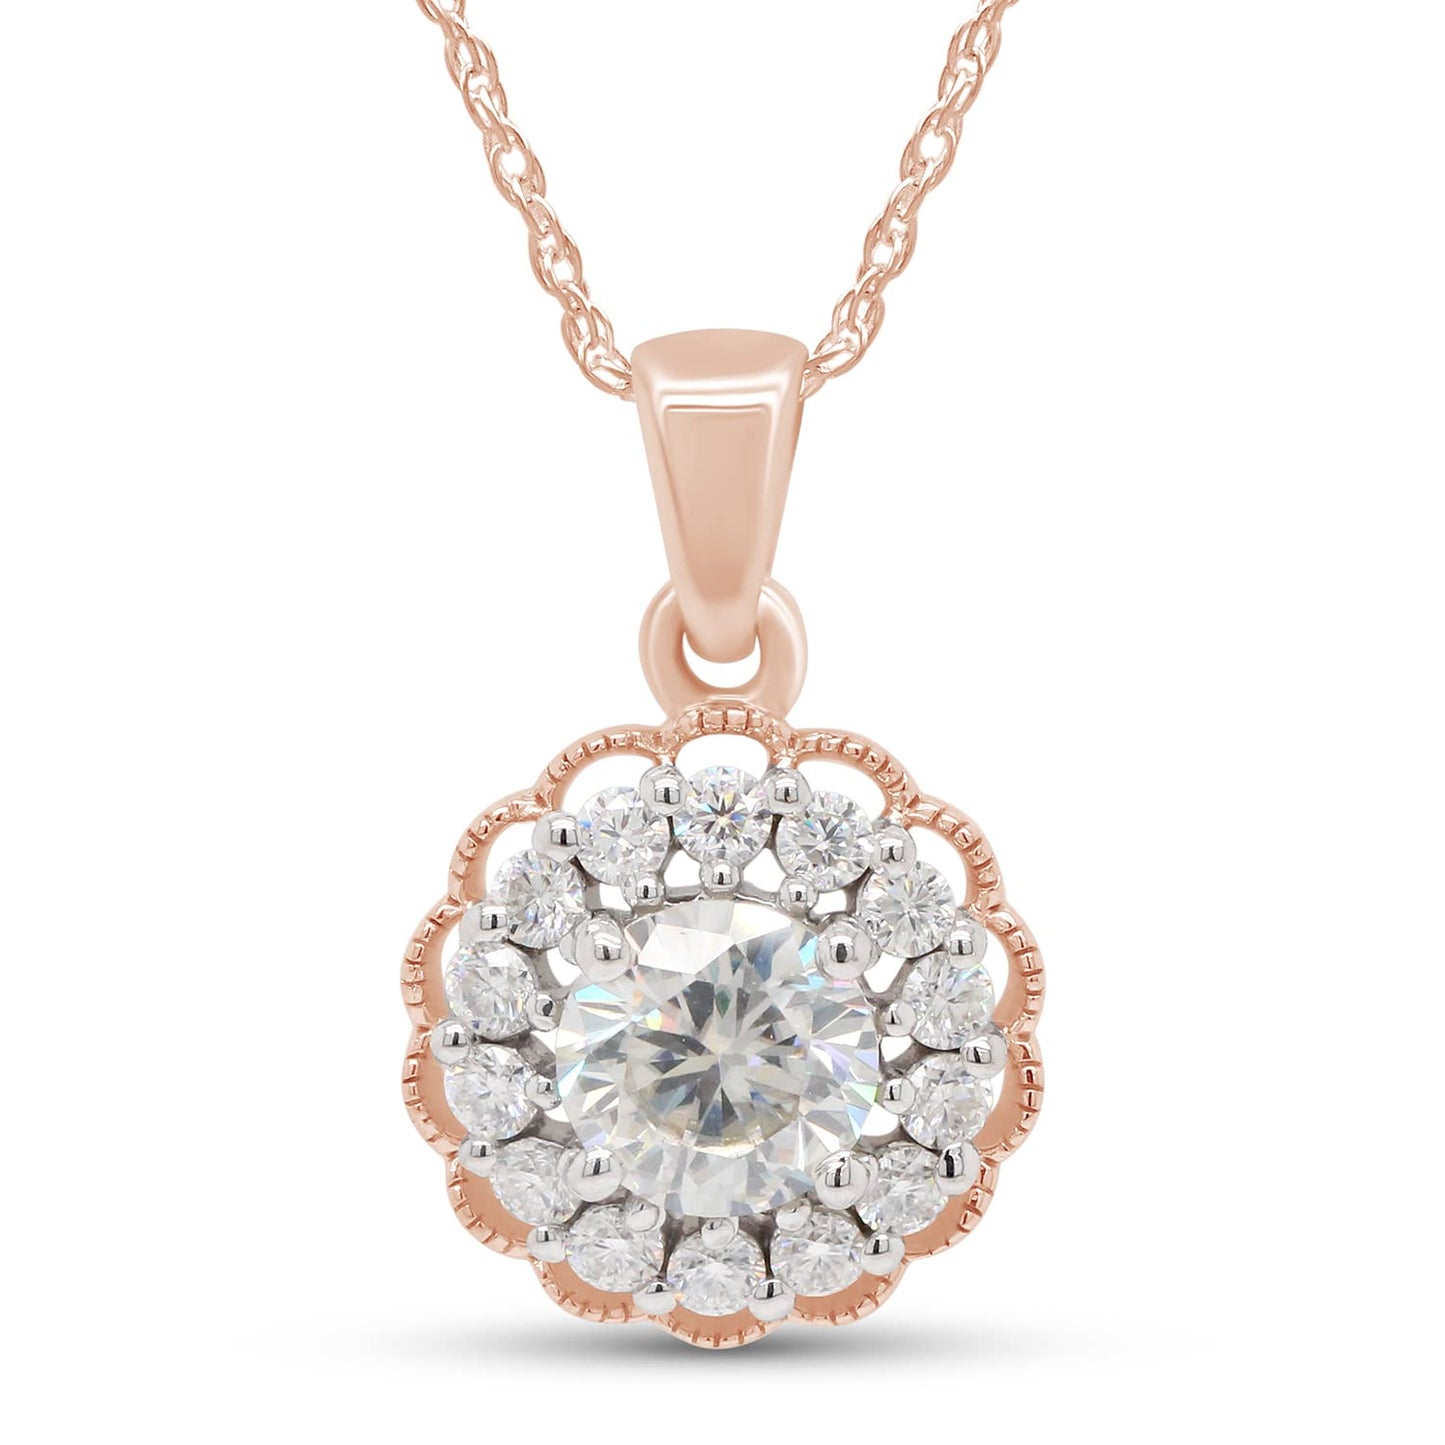 Load image into Gallery viewer, 1 1/2 Carat Center Stone 7MM Lab Created Moissanite Diamond Halo Pendant Necklace in 10K or 14K Solid Gold For Women (1.50 Cttw)
